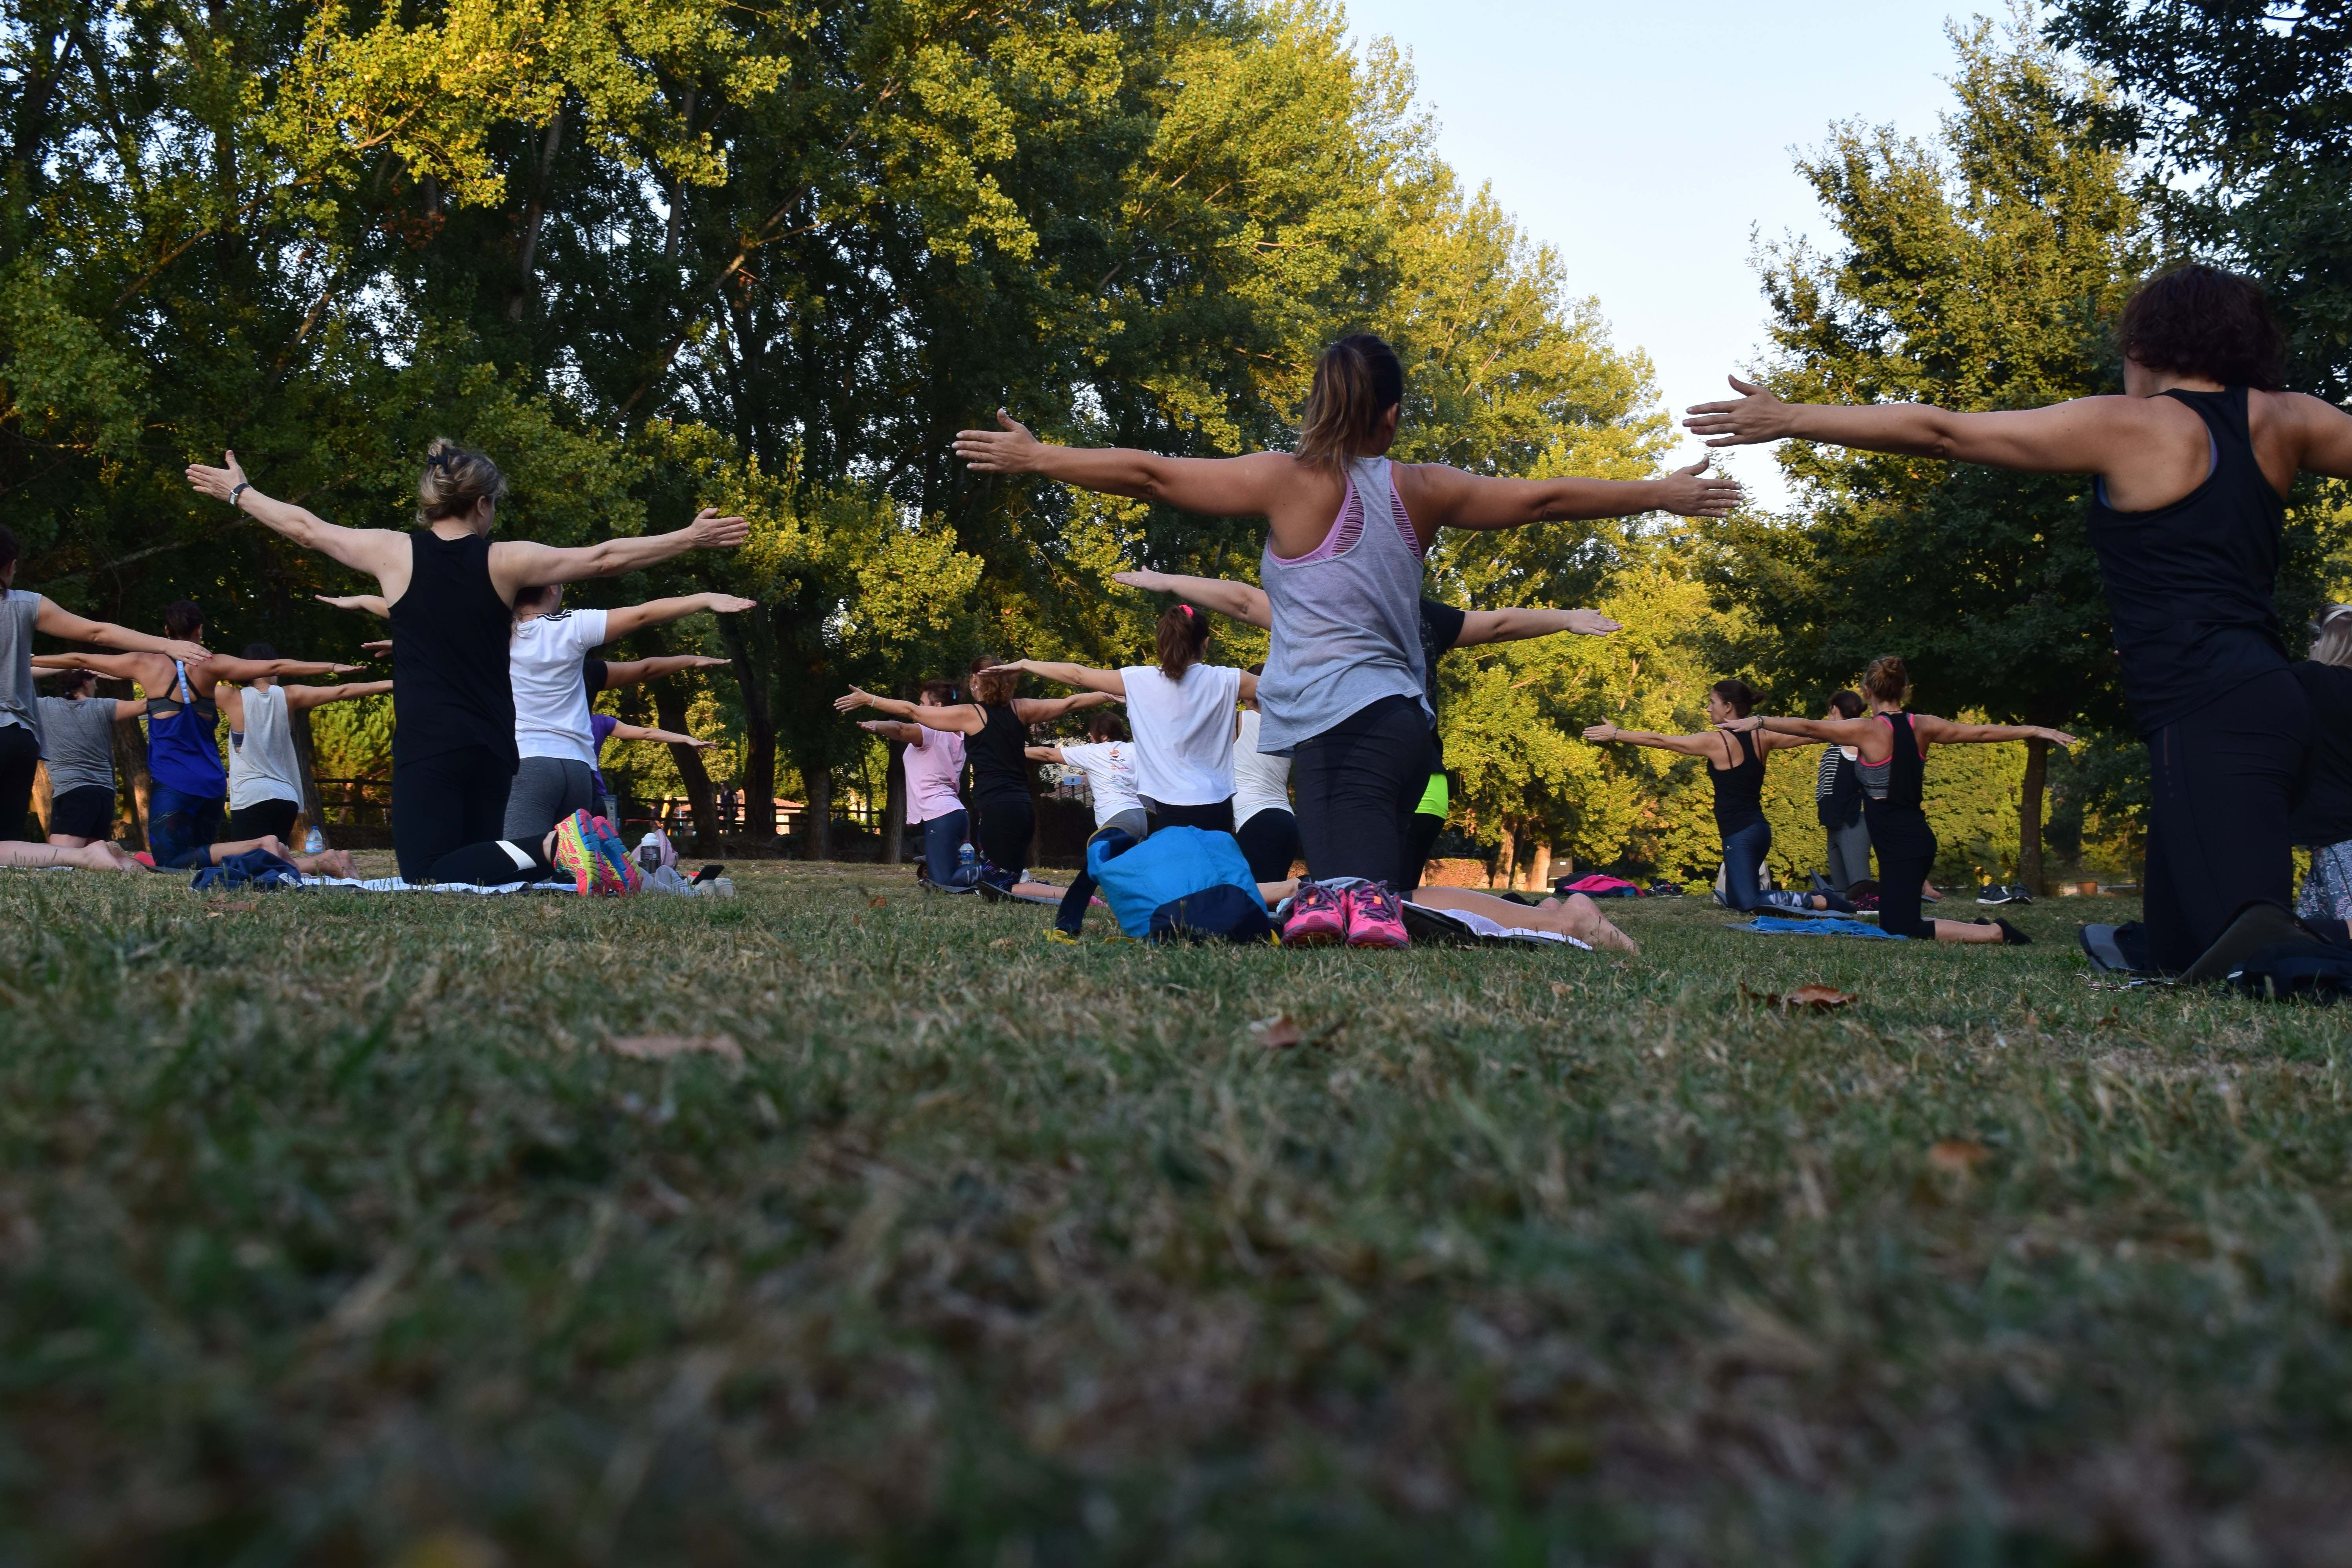 Group of people with arms outstretched doing yoga in a park.